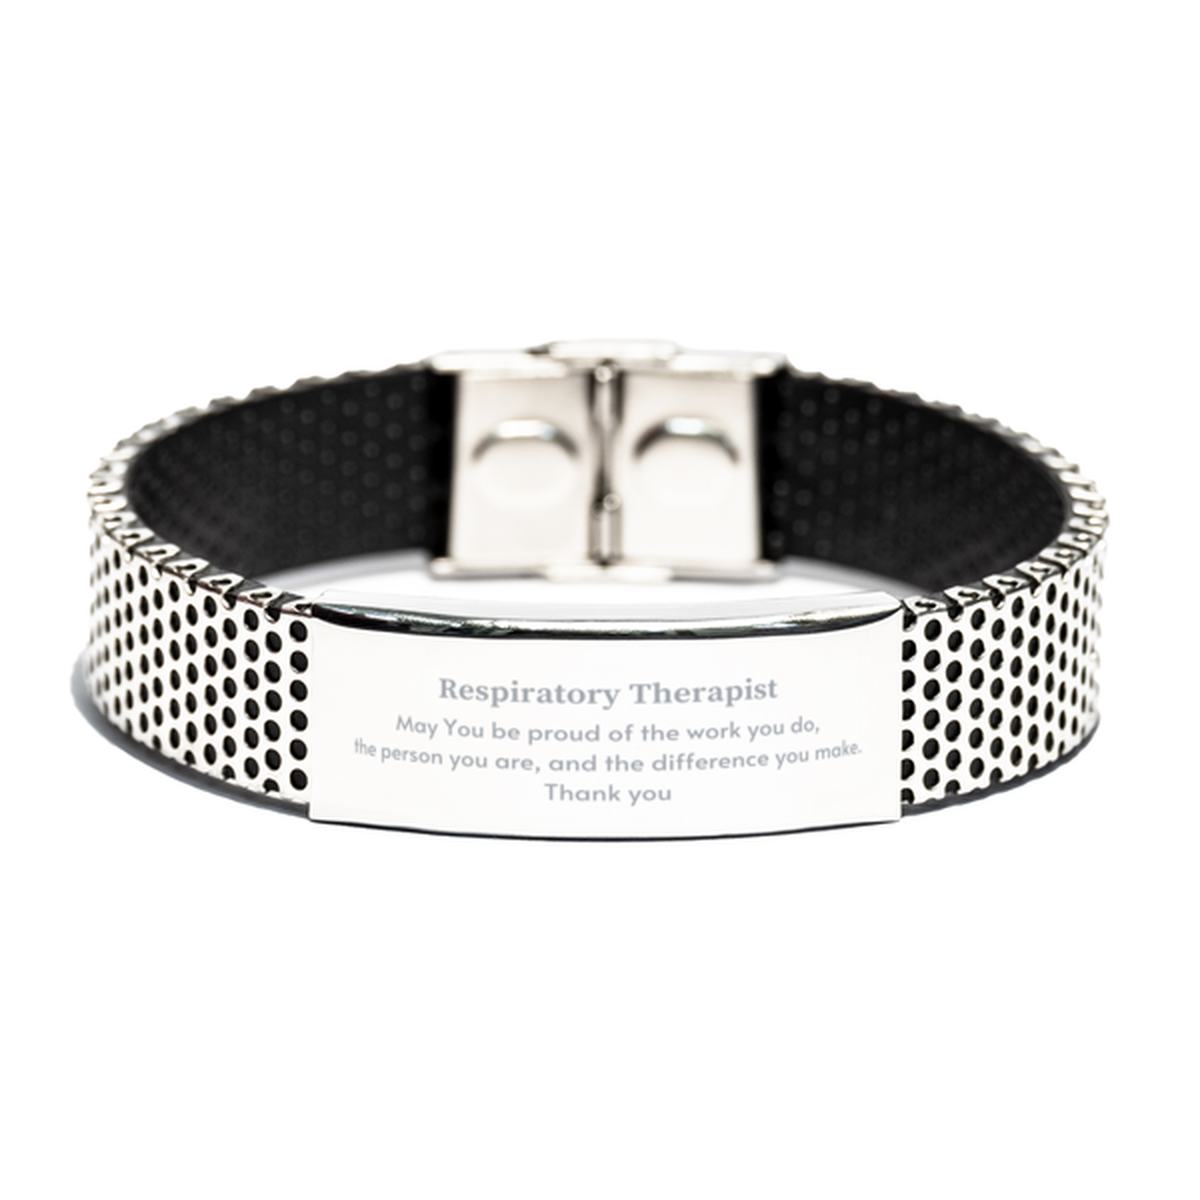 Heartwarming Stainless Steel Bracelet Retirement Coworkers Gifts for Respiratory Therapist, Respiratory Therapist May You be proud of the work you do, the person you are Gifts for Boss Men Women Friends